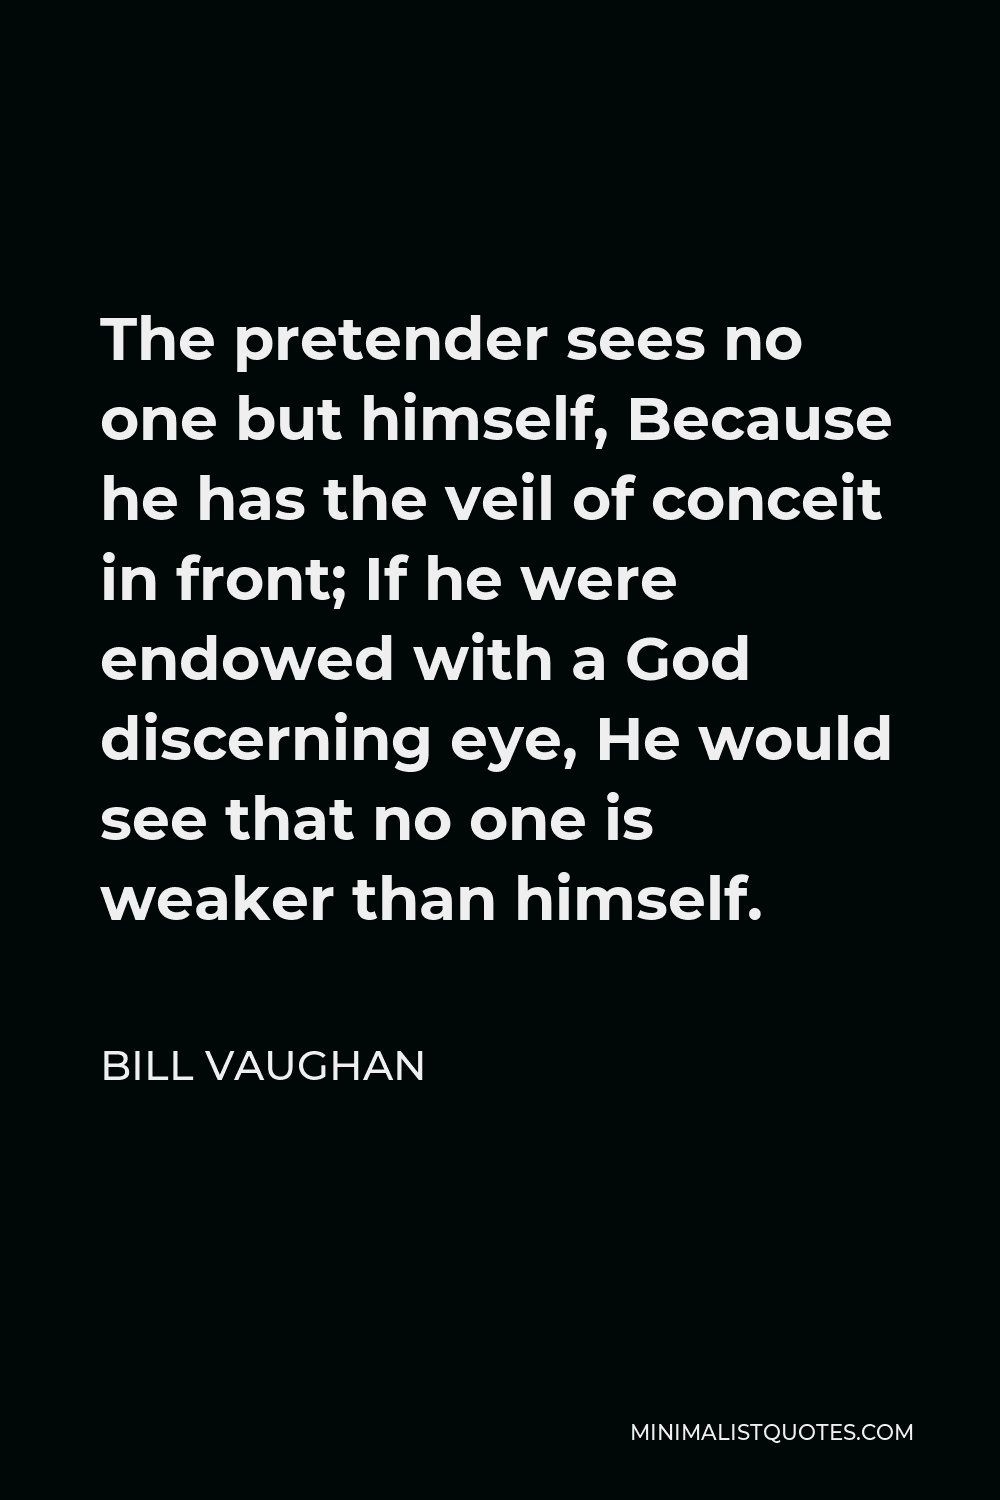 Bill Vaughan Quote - The pretender sees no one but himself, Because he has the veil of conceit in front; If he were endowed with a God discerning eye, He would see that no one is weaker than himself.